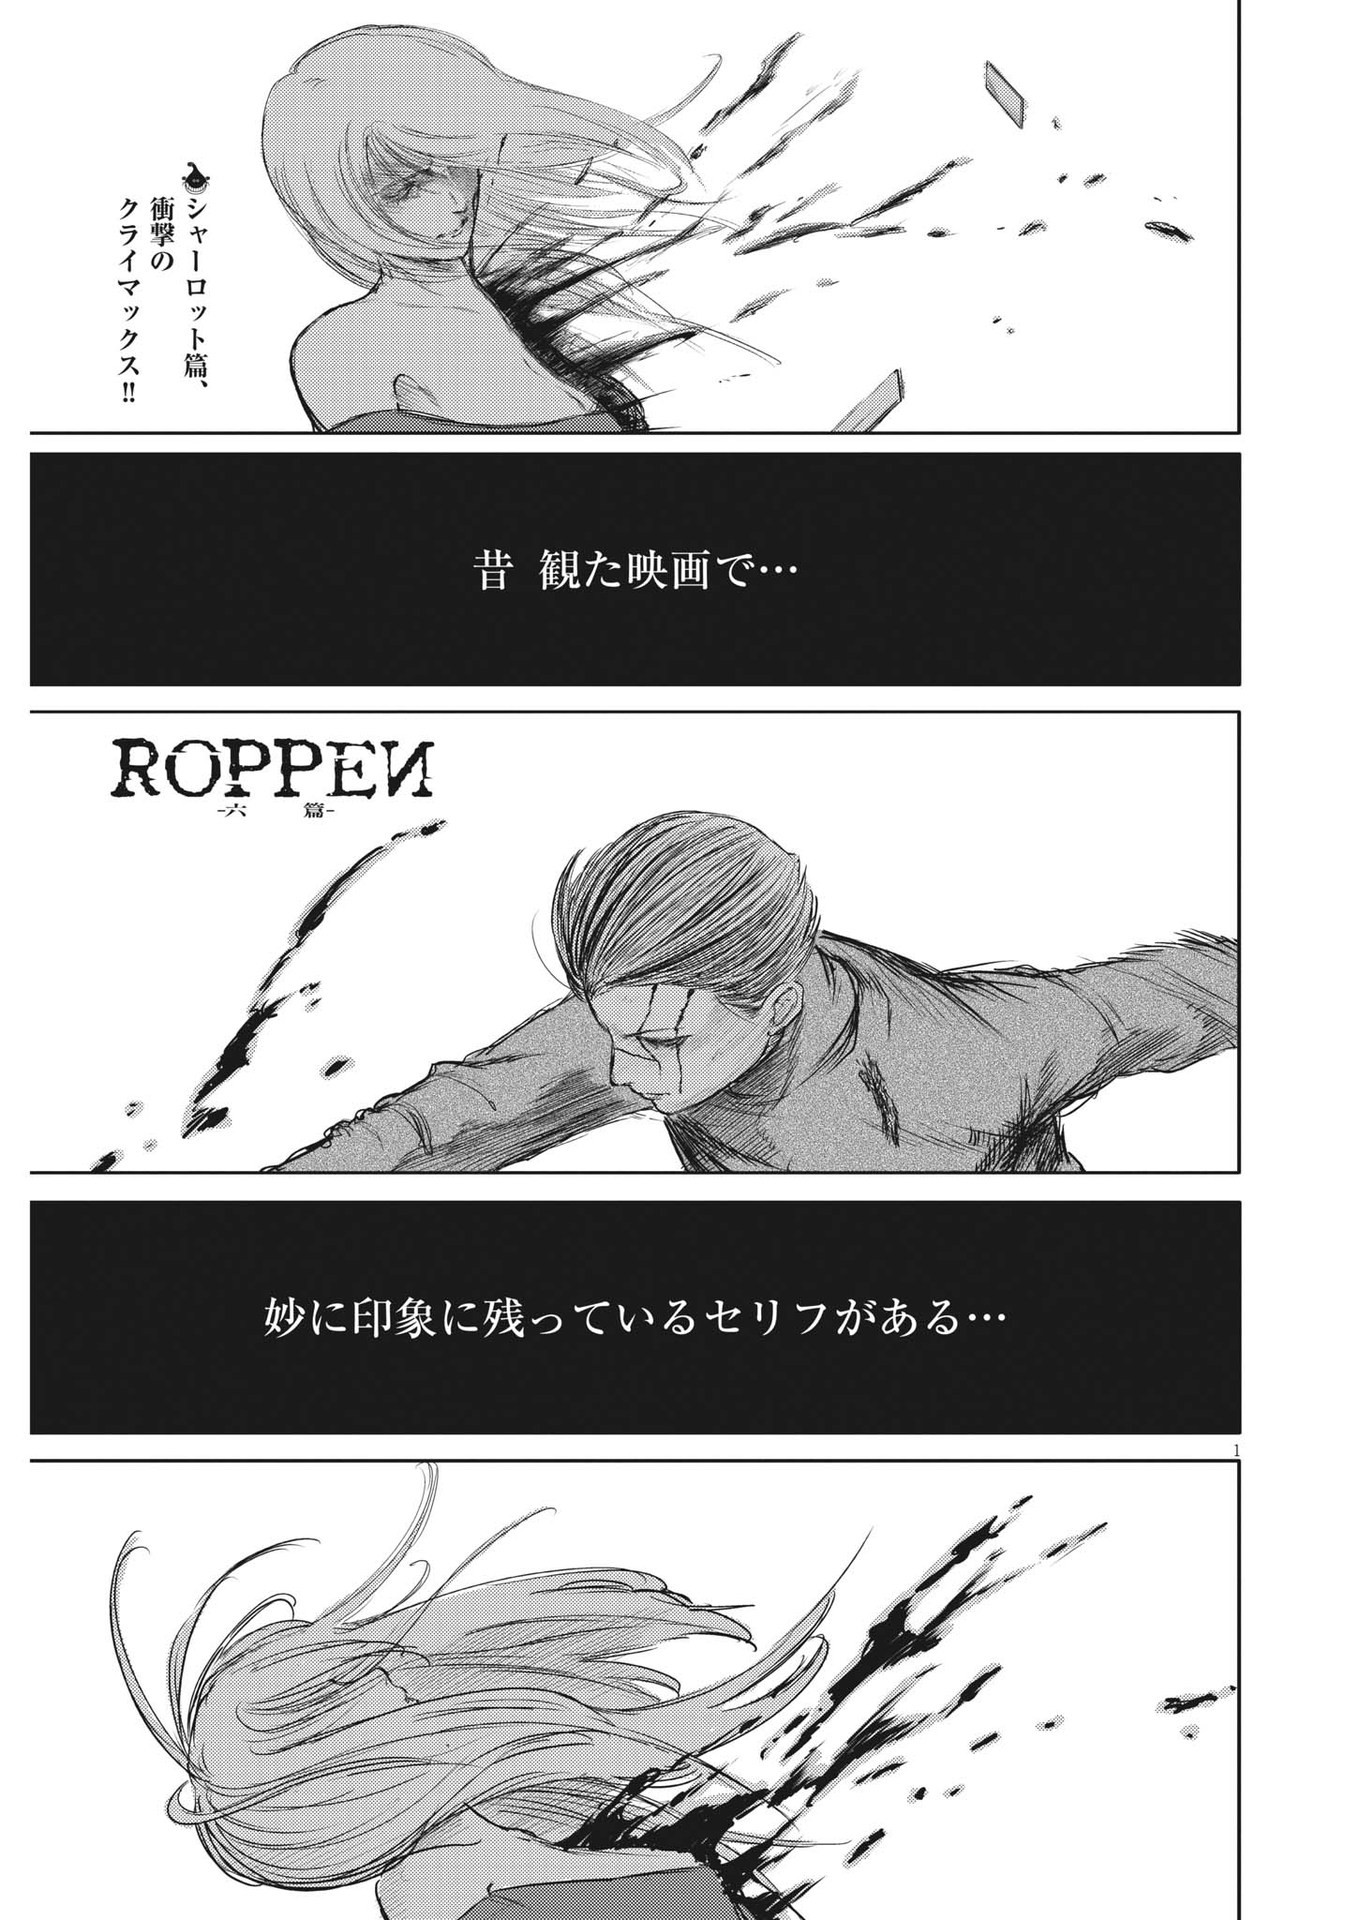 Roppen - Chapter 45 - Page 1